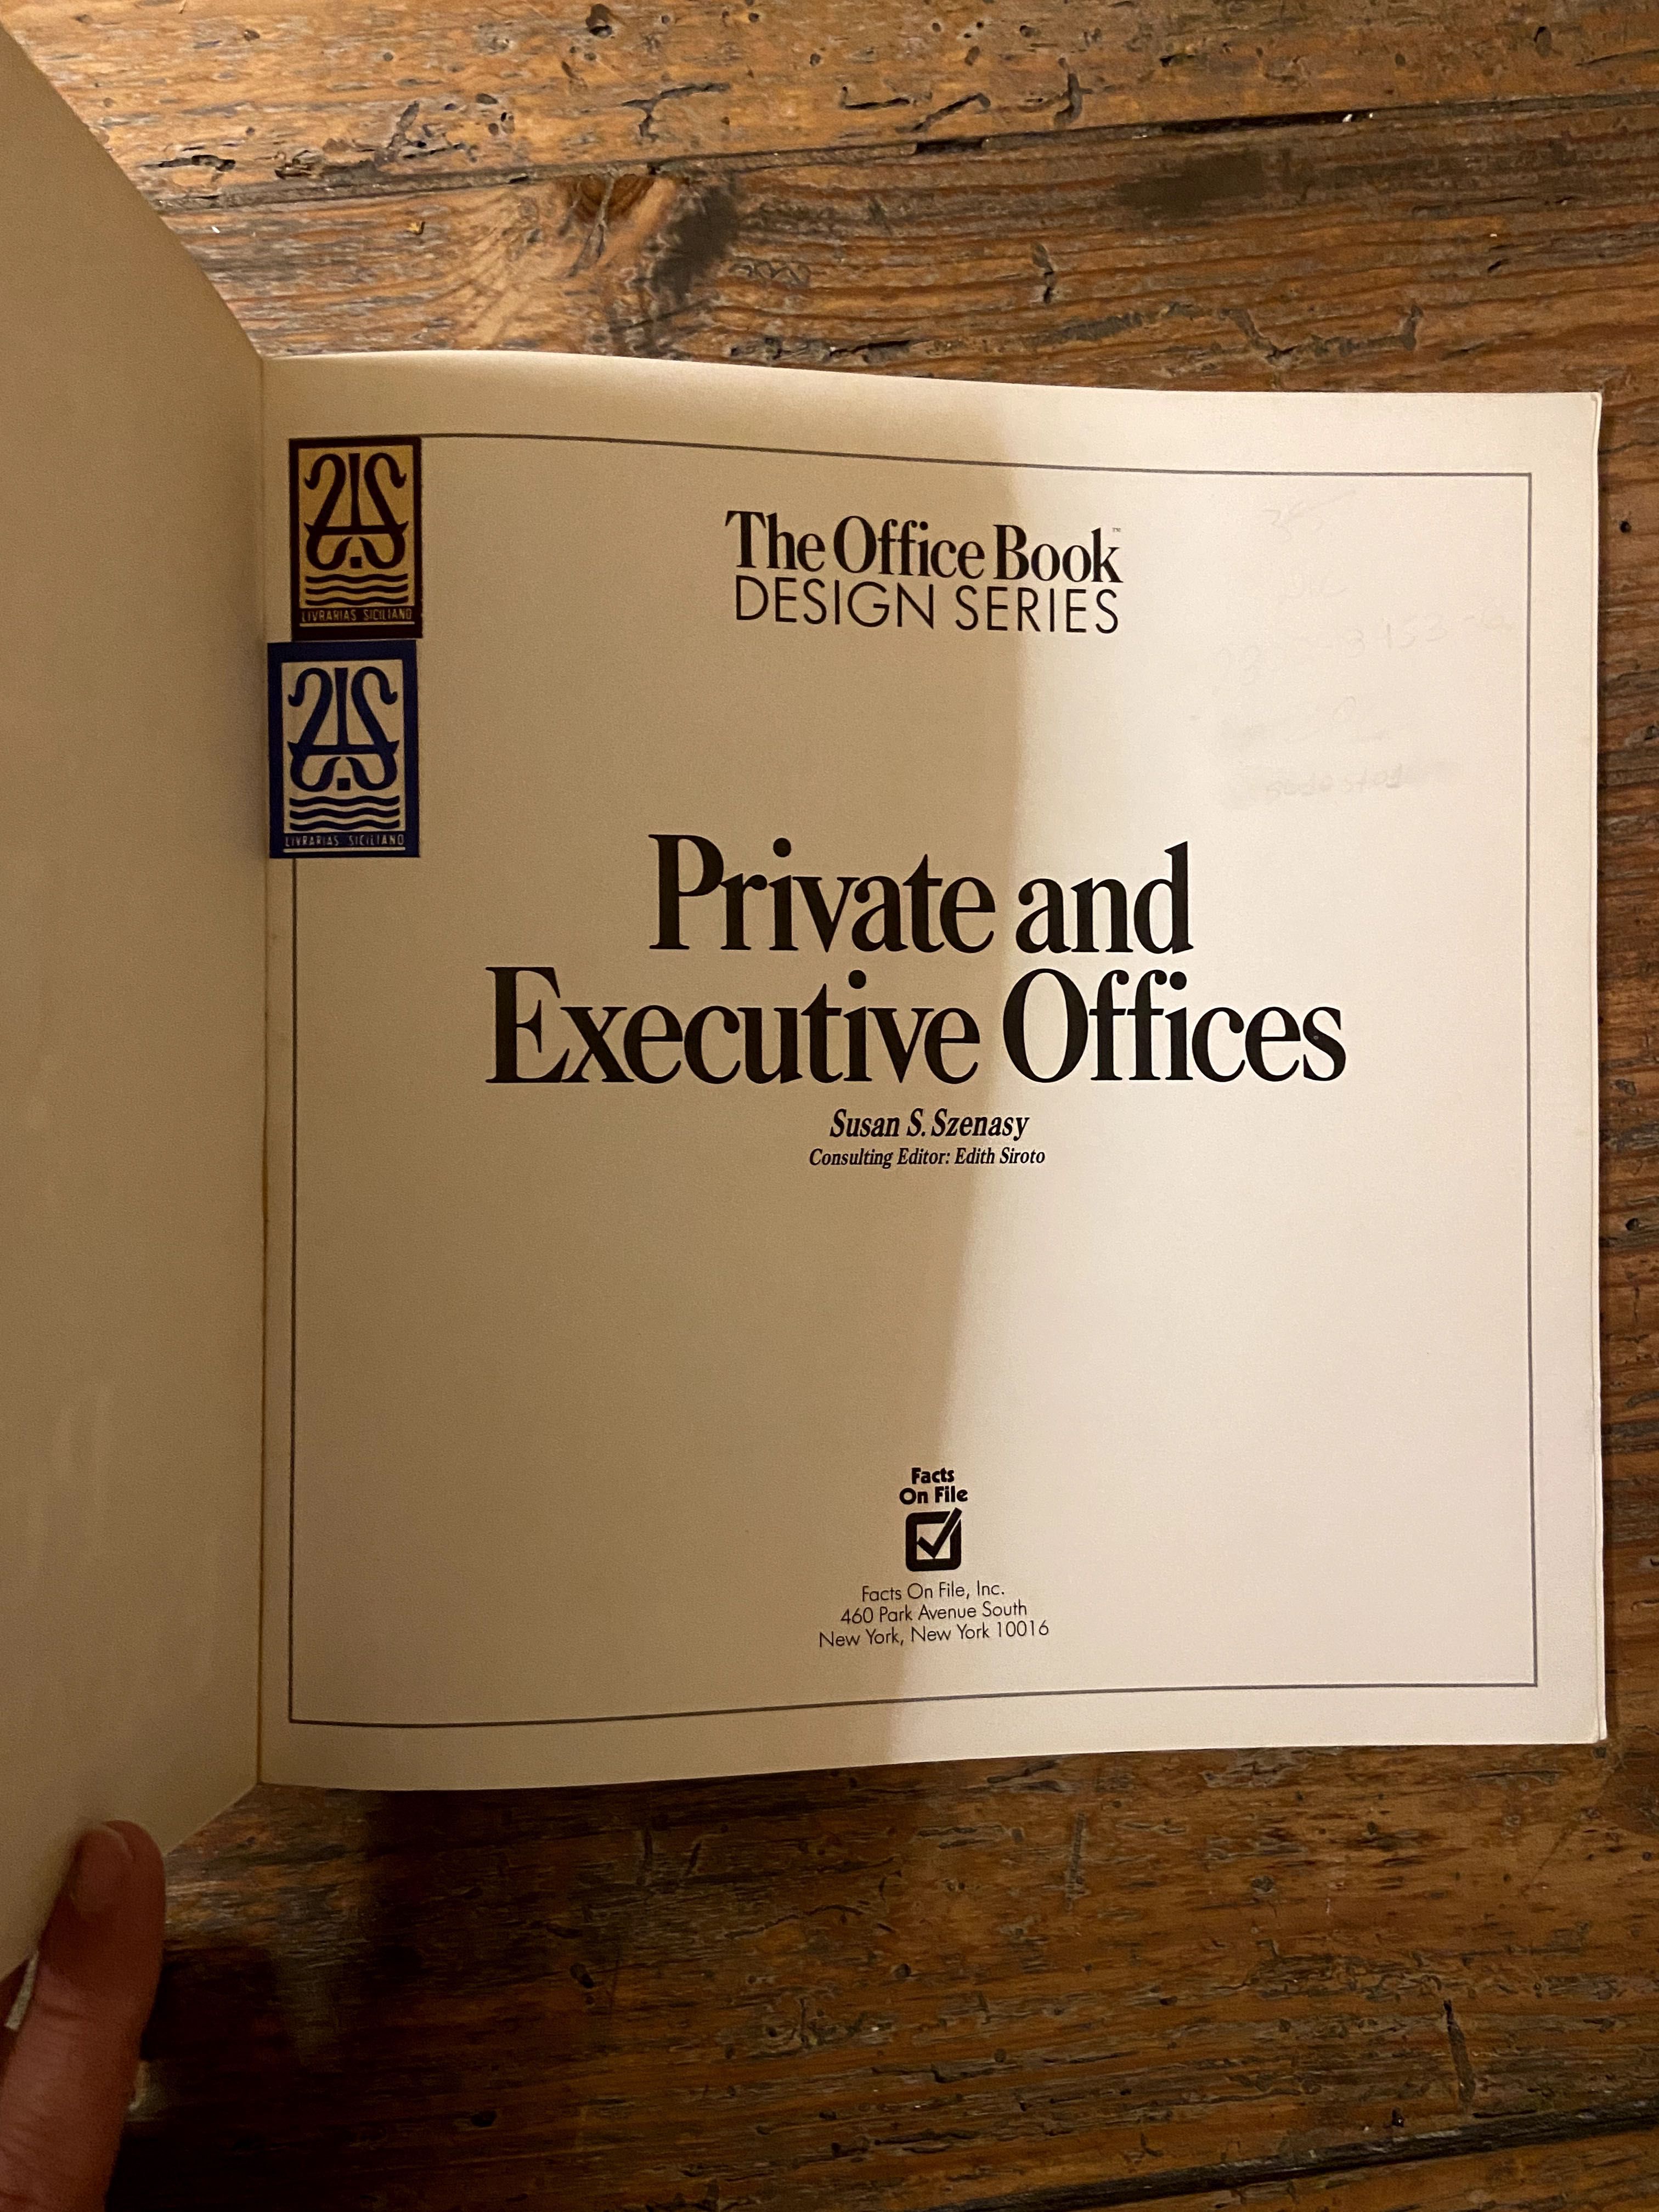 Private and Executive Offices (Book Design) by Susan Szenasy 1984